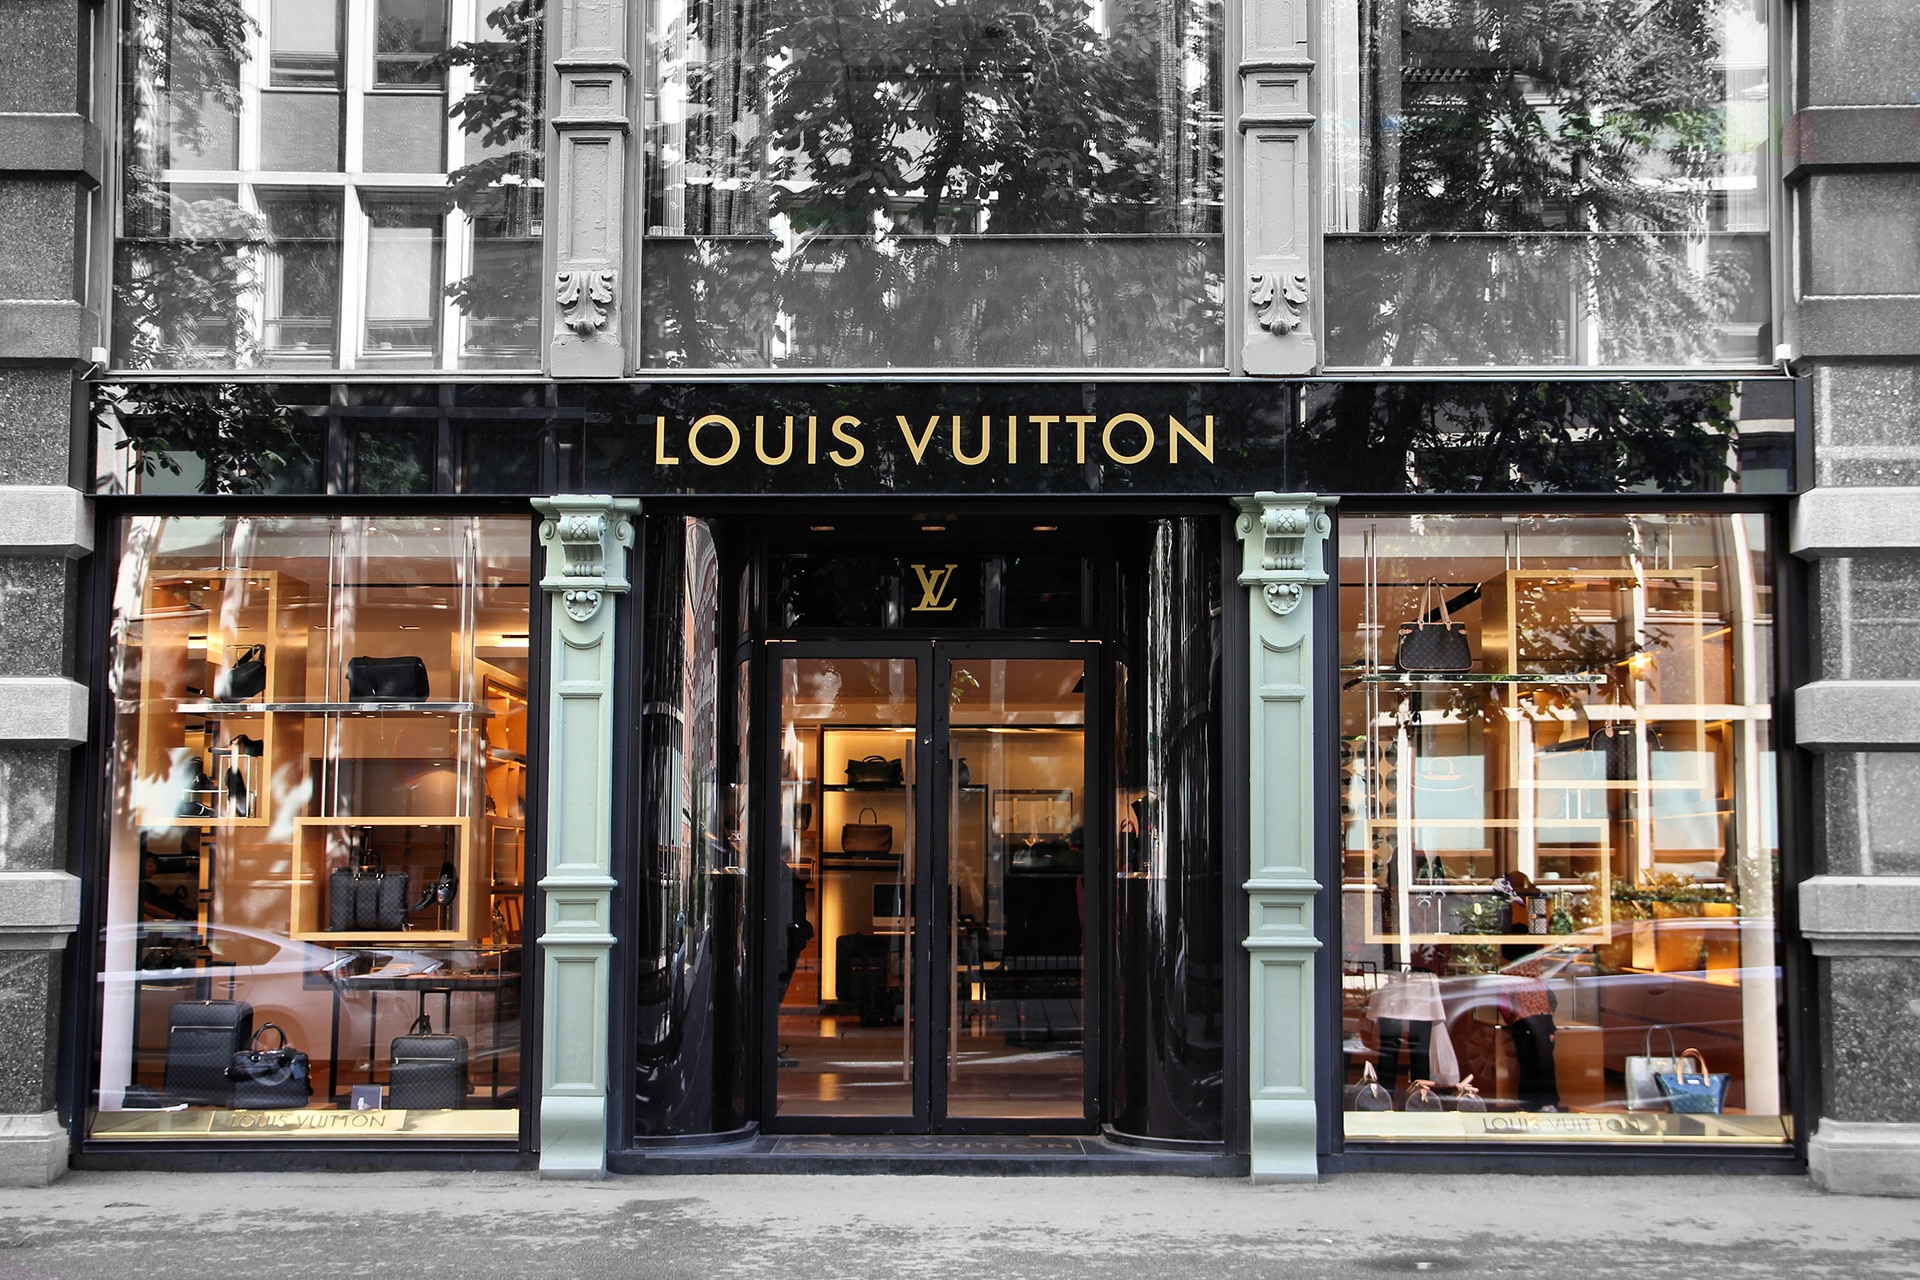 luxurynsight on X: In FY2019 the Top 10 luxury companies contributed more  than half of the total luxury goods sales of the Top 100 companies. LVMH,  Kering, Richemont and Chanel were also